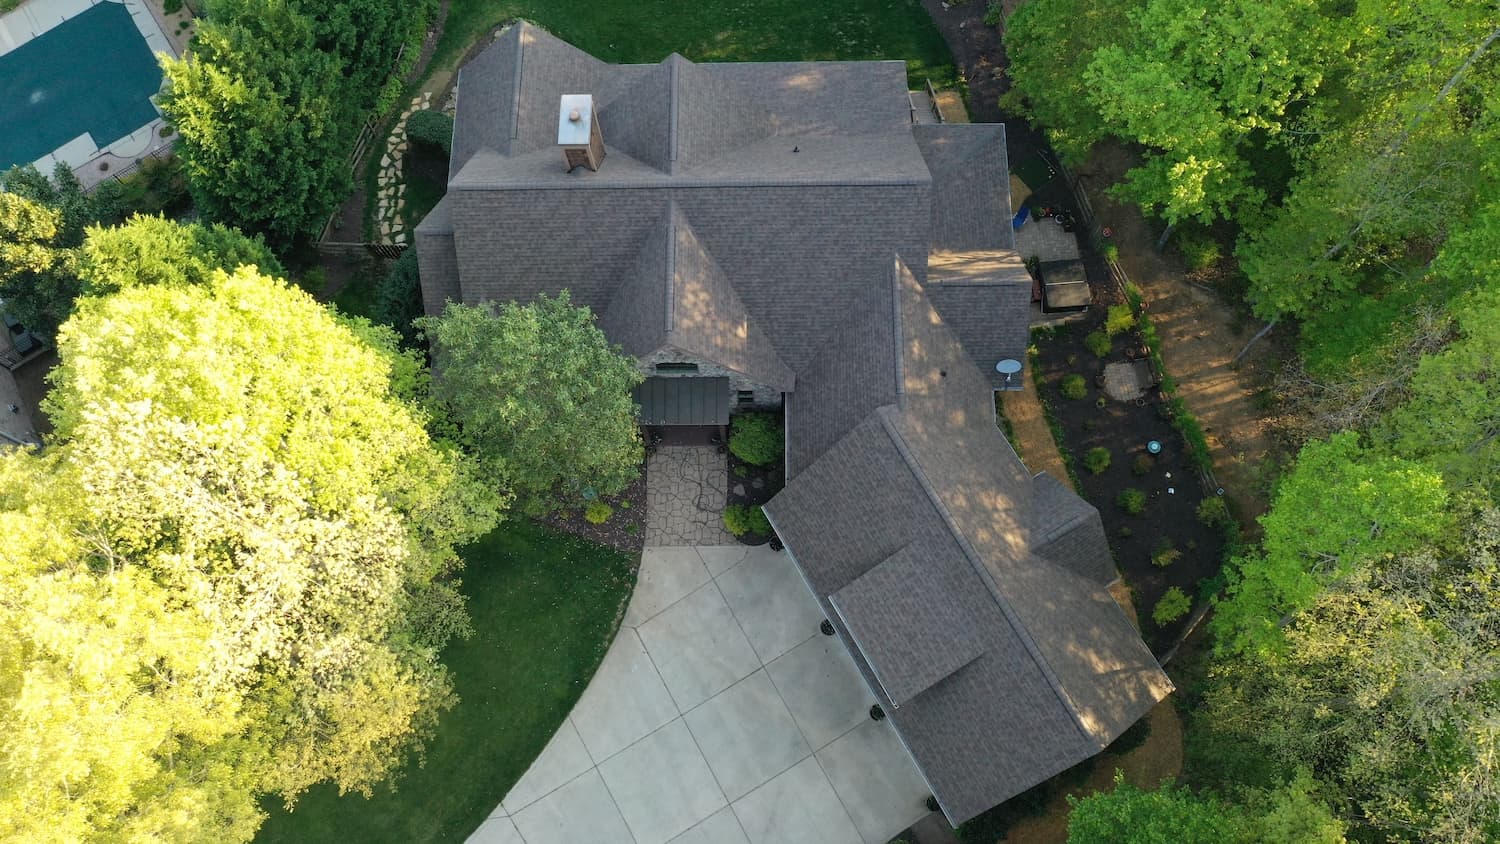 http://top%20front%20aerial%20view%20of%20trudefinition%20duration%20teak%20shingles%20on%20residential%20home%20and%20driveway